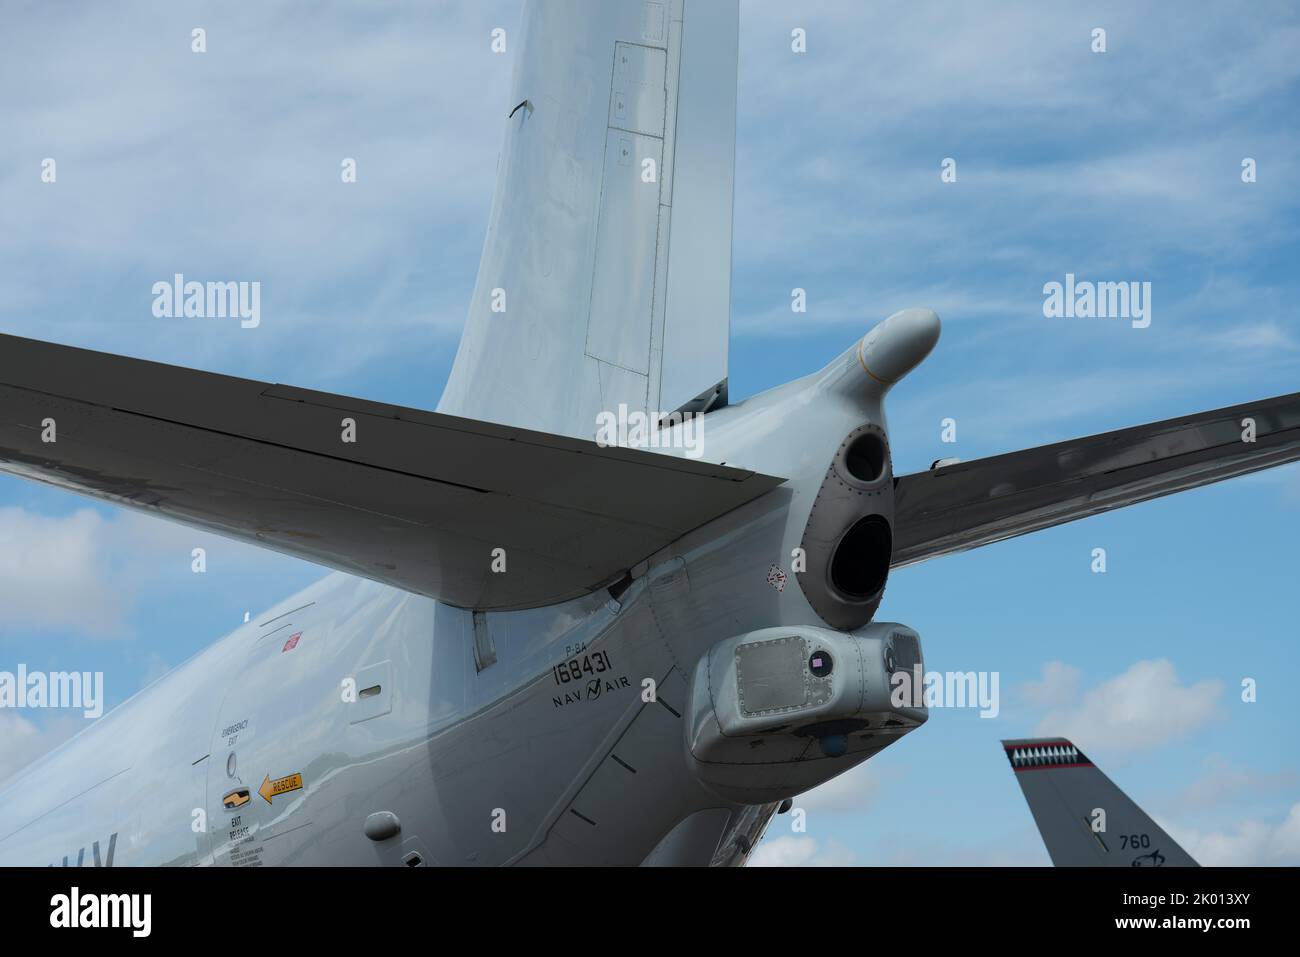 Singapore, 15 Feb, 2020: Tail of an reconnaissance airplane used by US for various missions around the world. It is also used by a numer of allies. Stock Photo